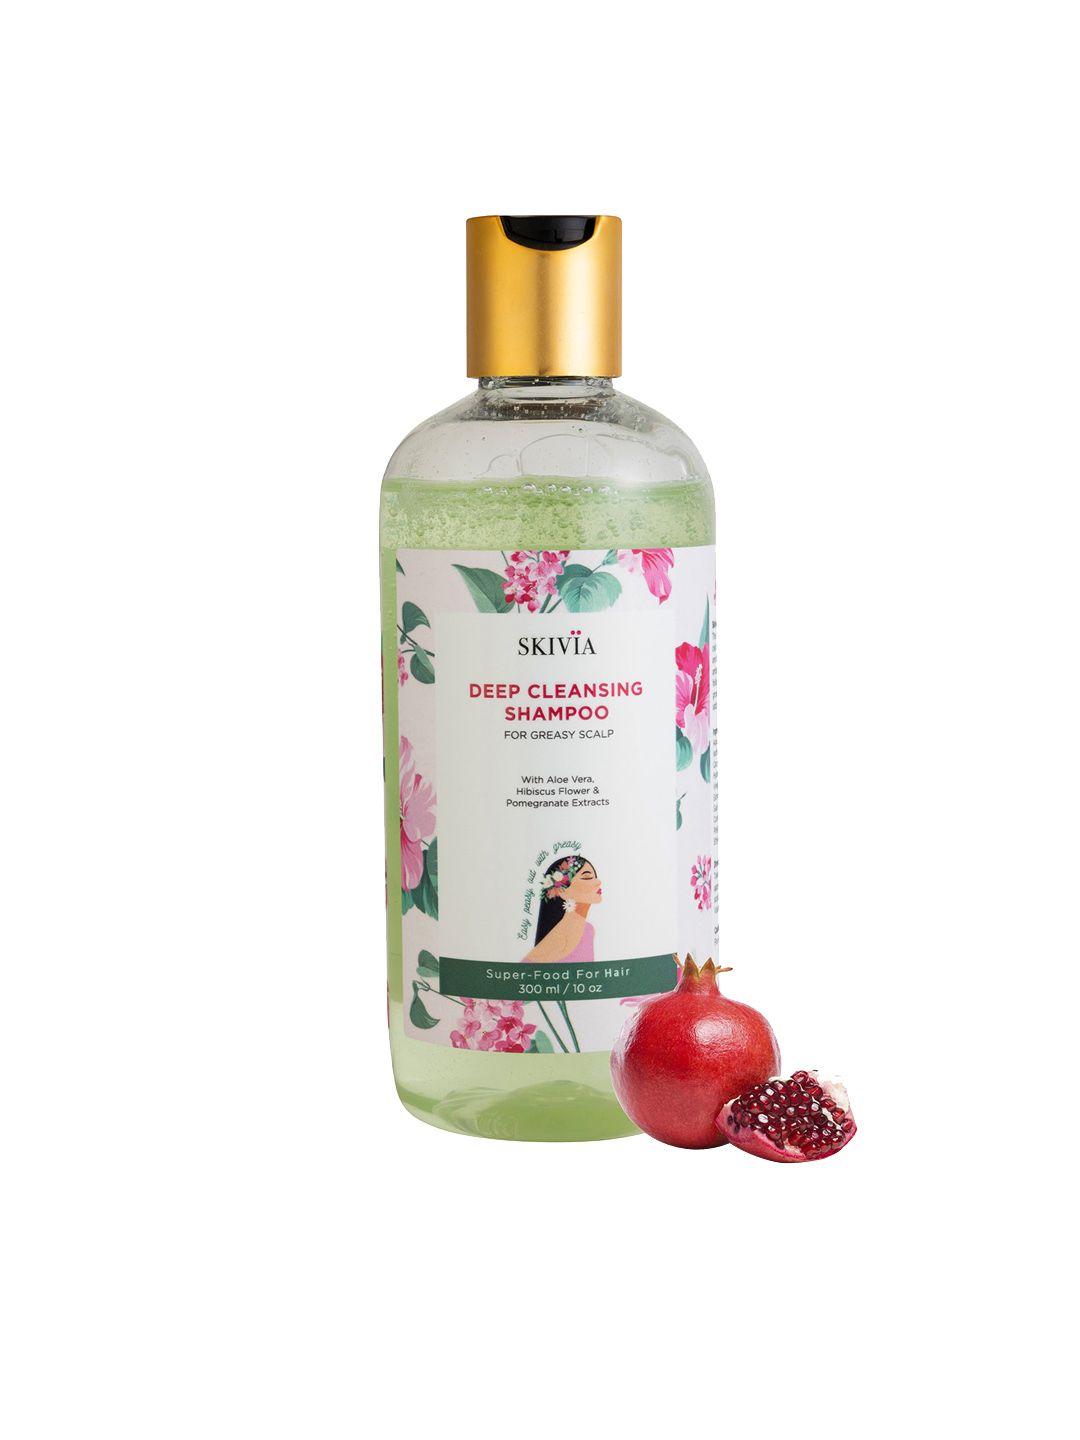 skivia deep cleansing shampoo with hibiscus flower & aloe vera for greasy scalp-300 ml